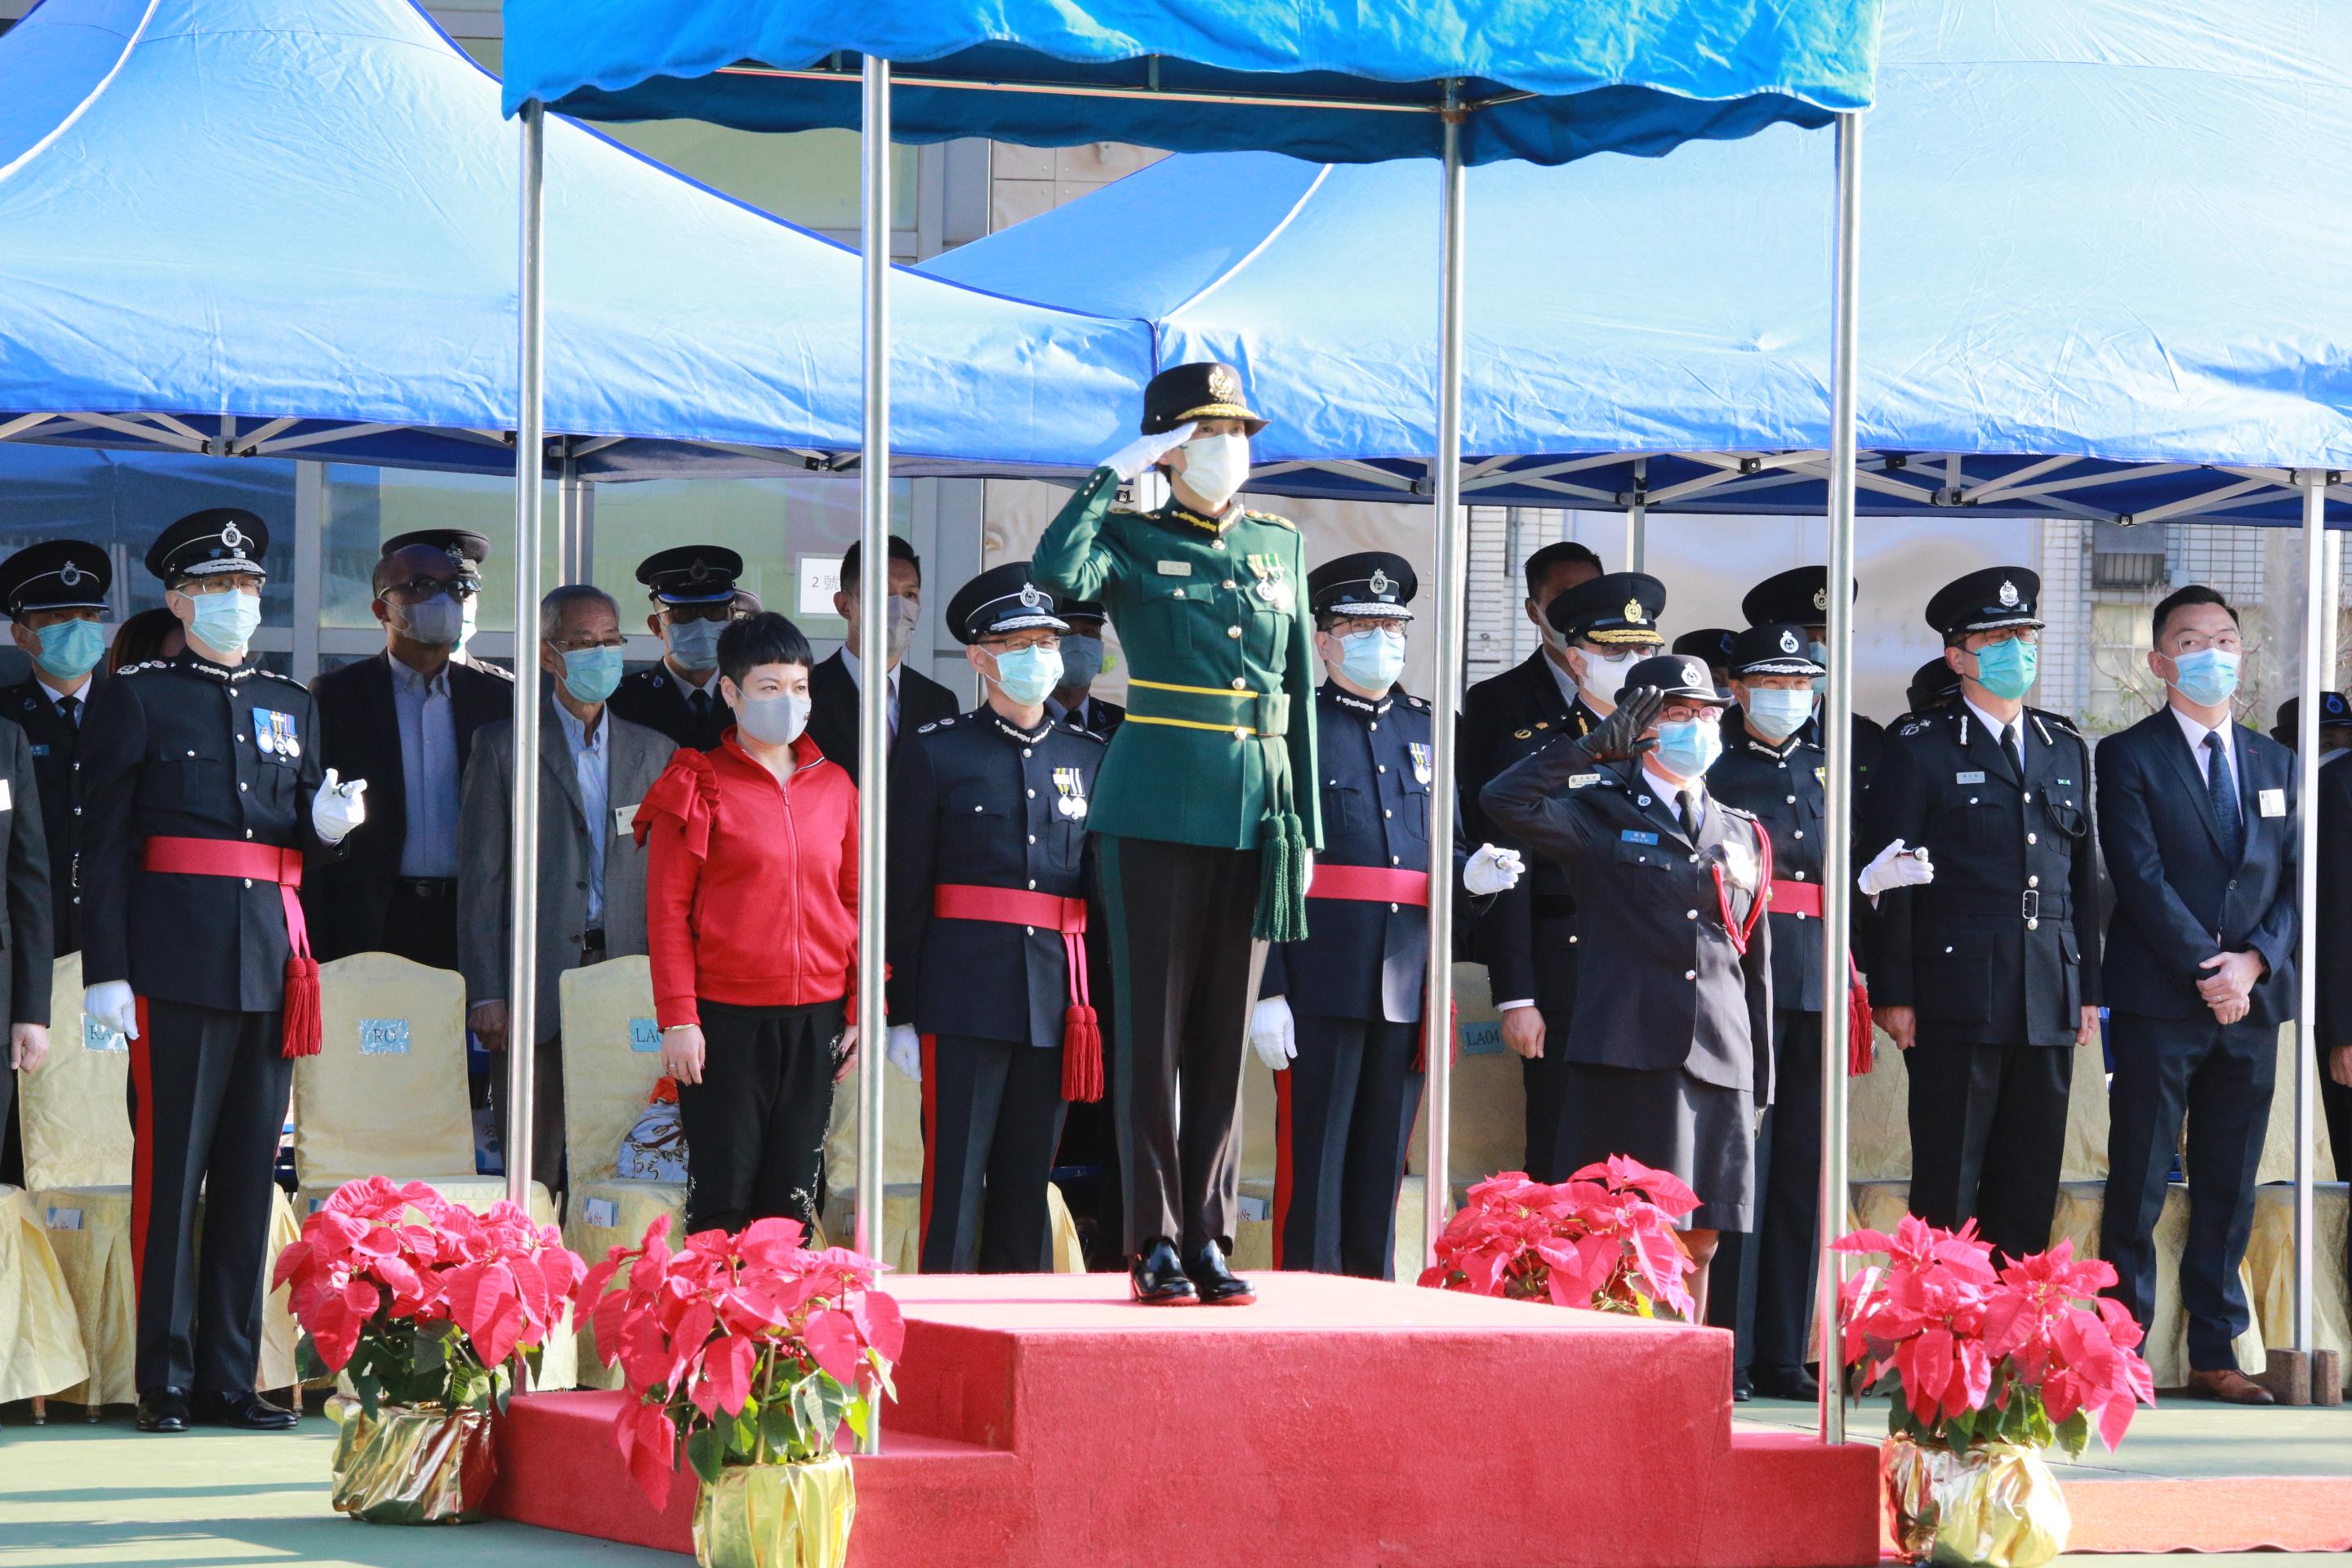 The Civil Aid Service held the 83rd Recruits Passing-out Parade at its headquarters today (December 12). Photo shows the Commissioner of Customs and Excise, Ms Louise Ho, taking the salute from the parade.